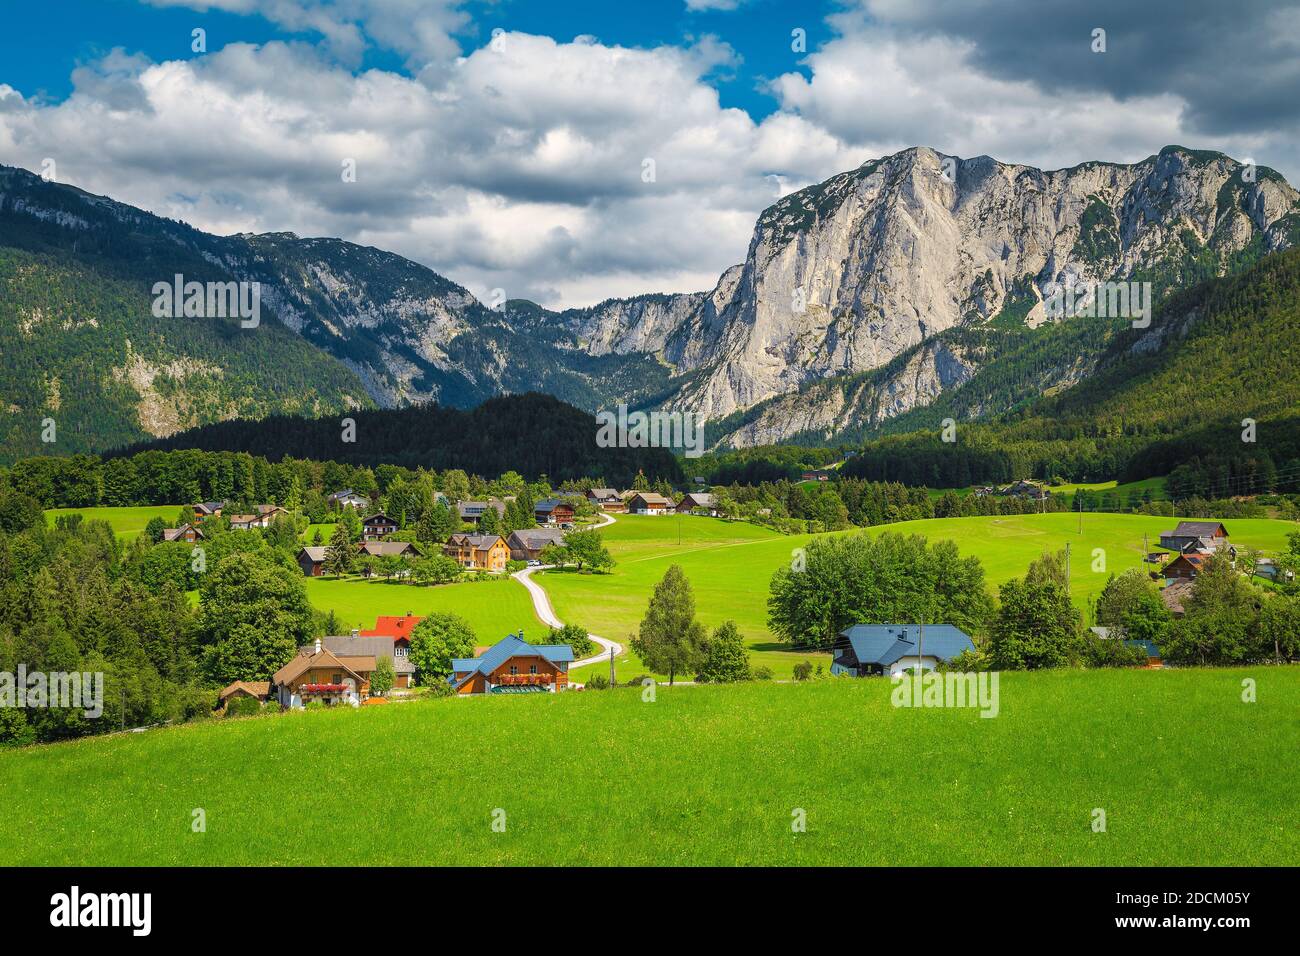 Picturesque summer scenery and cute alpine village with high mountains in background, Altaussee, Salzkammergut, Austria, Europe Stock Photo